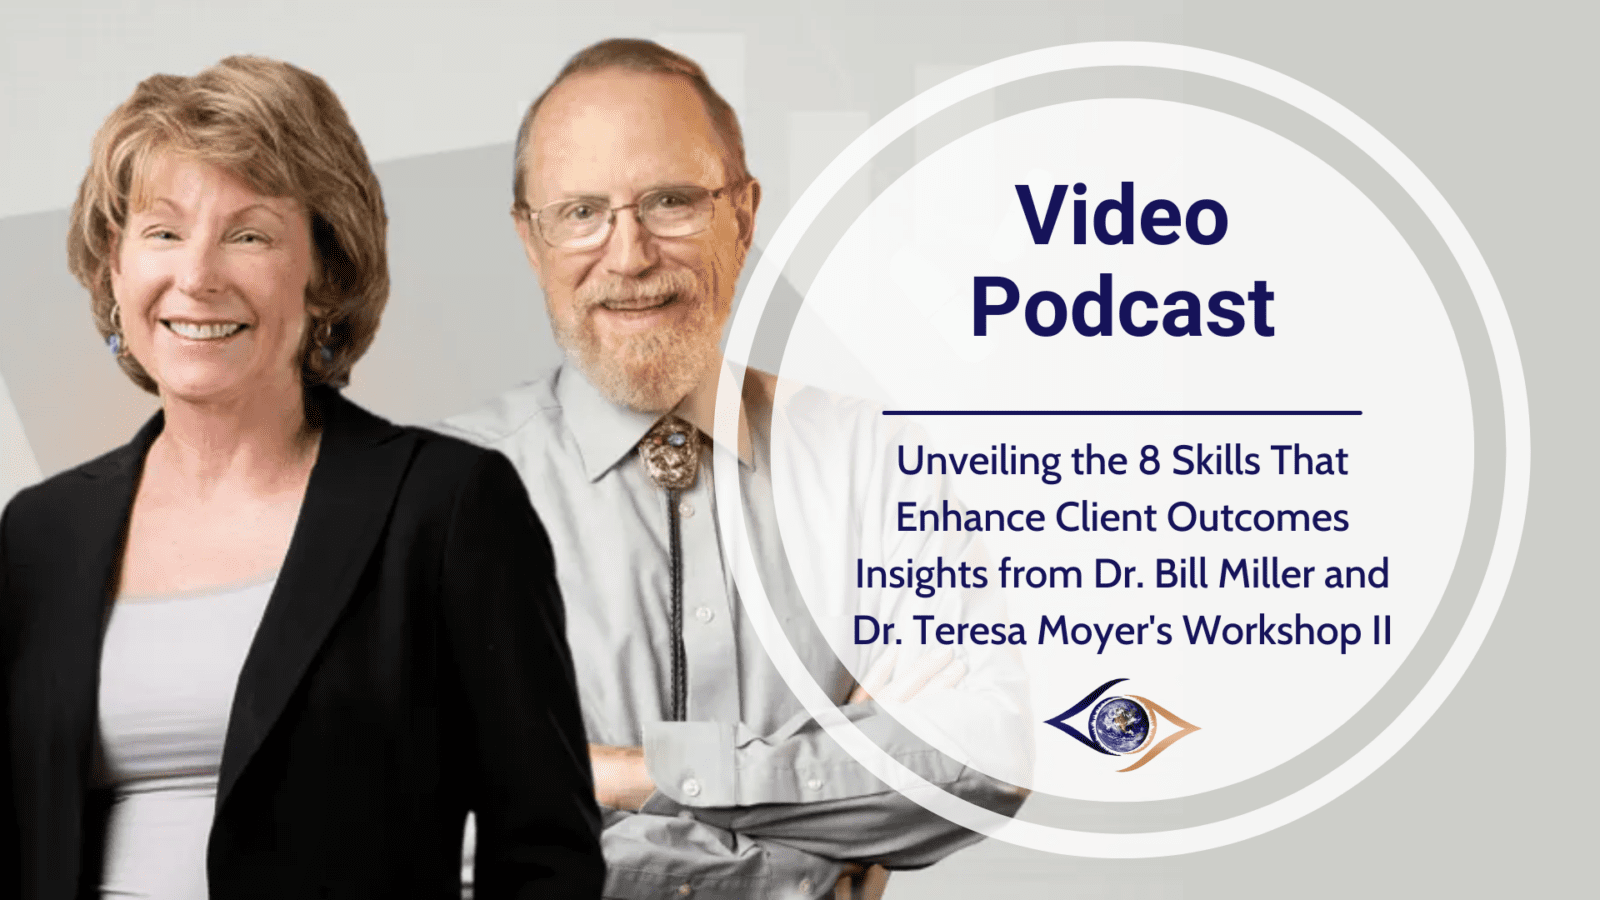 Unveiling the 8 Skills That Enhance Client Outcomes Insights from Dr. Bill Miller and Dr. Teresa Moyer’s Workshop II